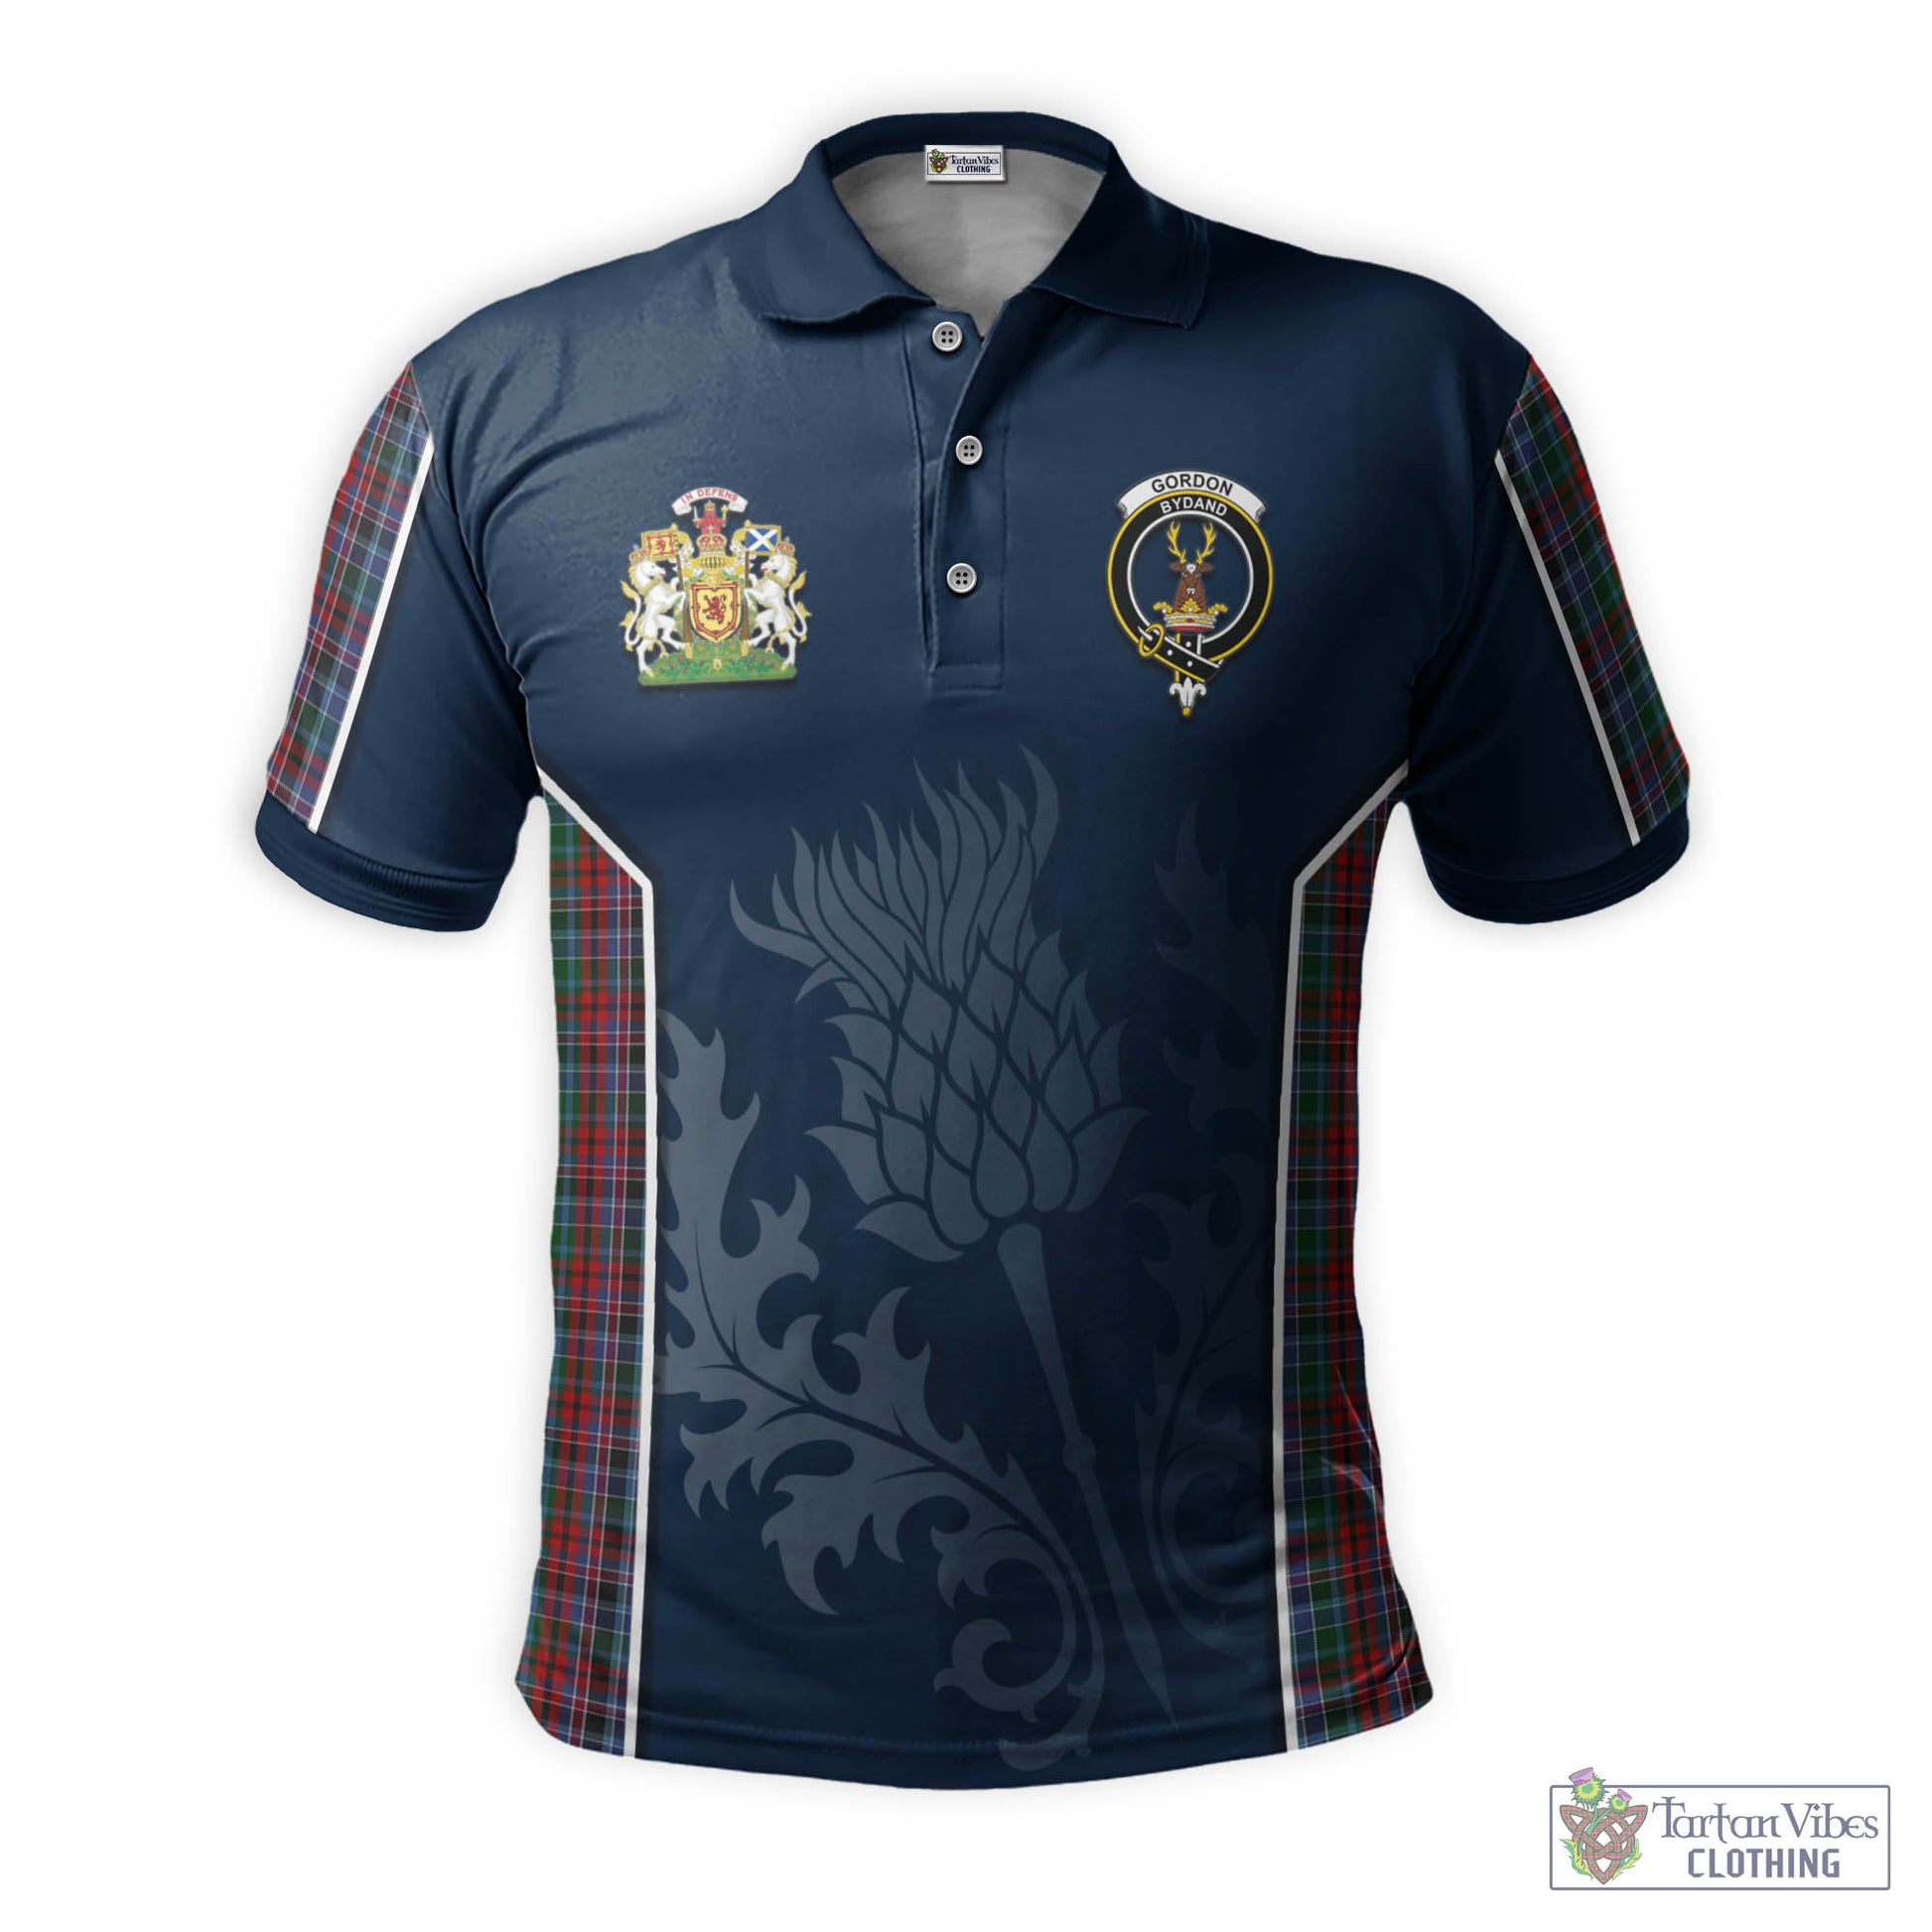 Tartan Vibes Clothing Gordon Red Tartan Men's Polo Shirt with Family Crest and Scottish Thistle Vibes Sport Style